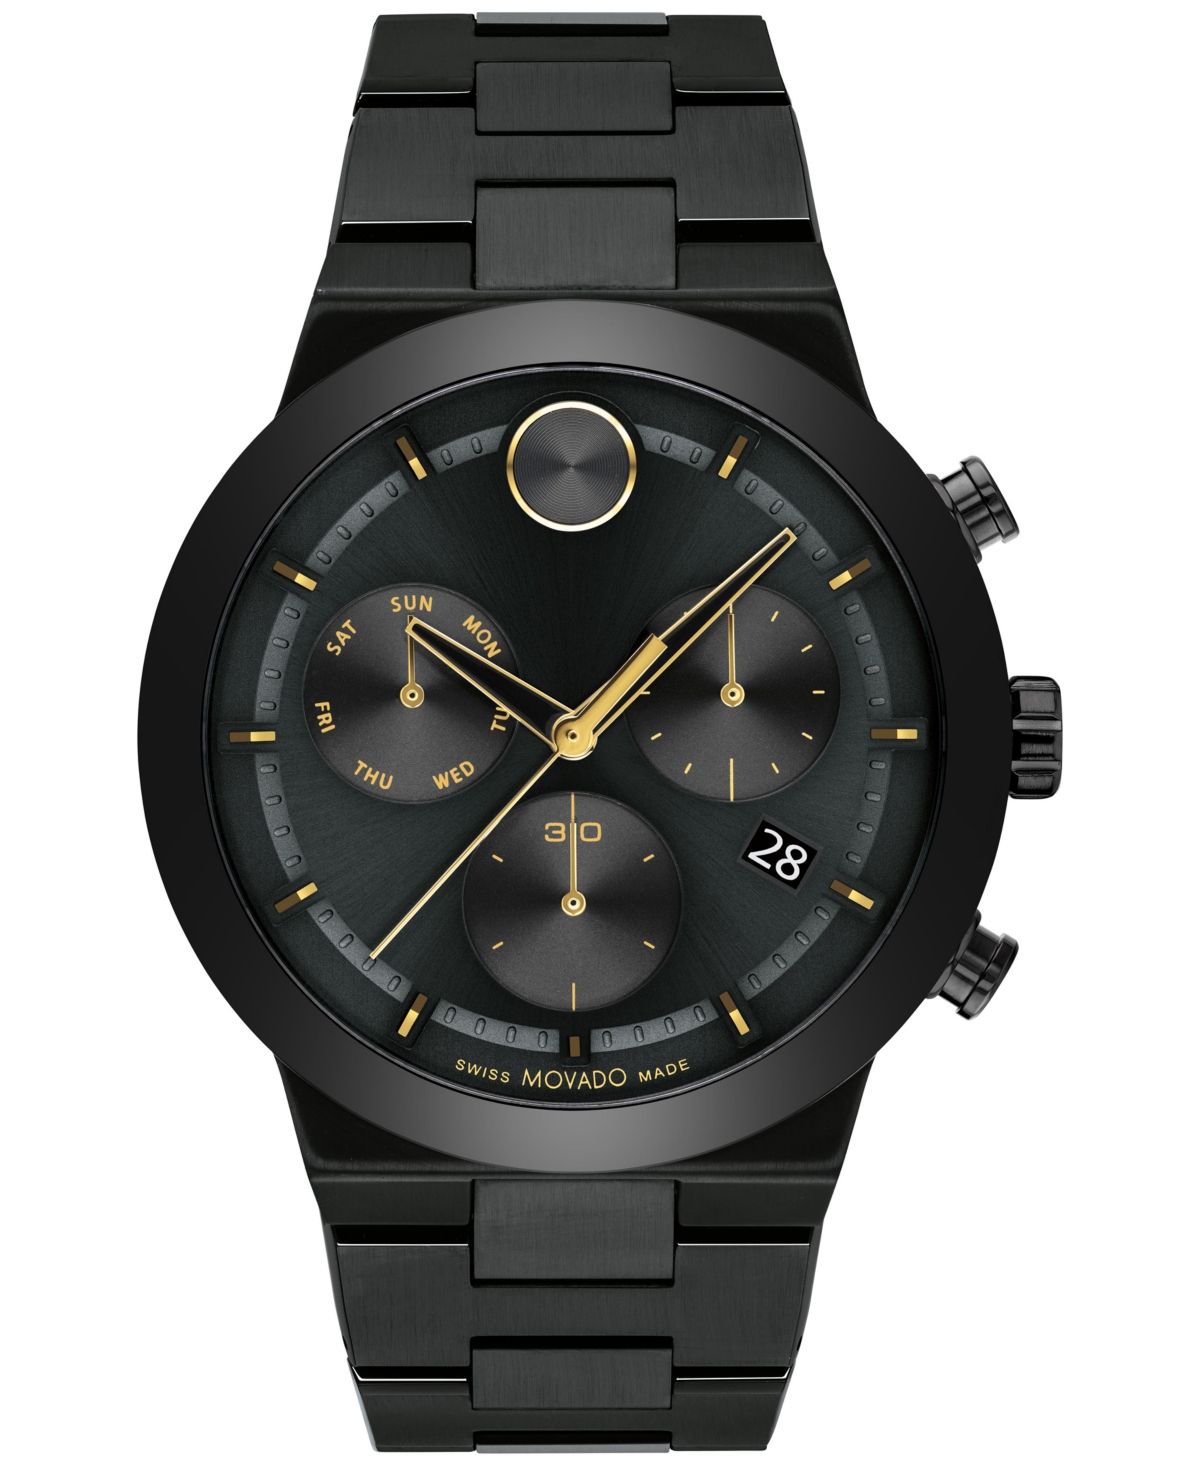 MOVADO MEN'S SWISS CHRONOGRAPH BOLD FUSION BLACK ION-PLATED STAINLESS STEEL BRACELET WATCH 44MM